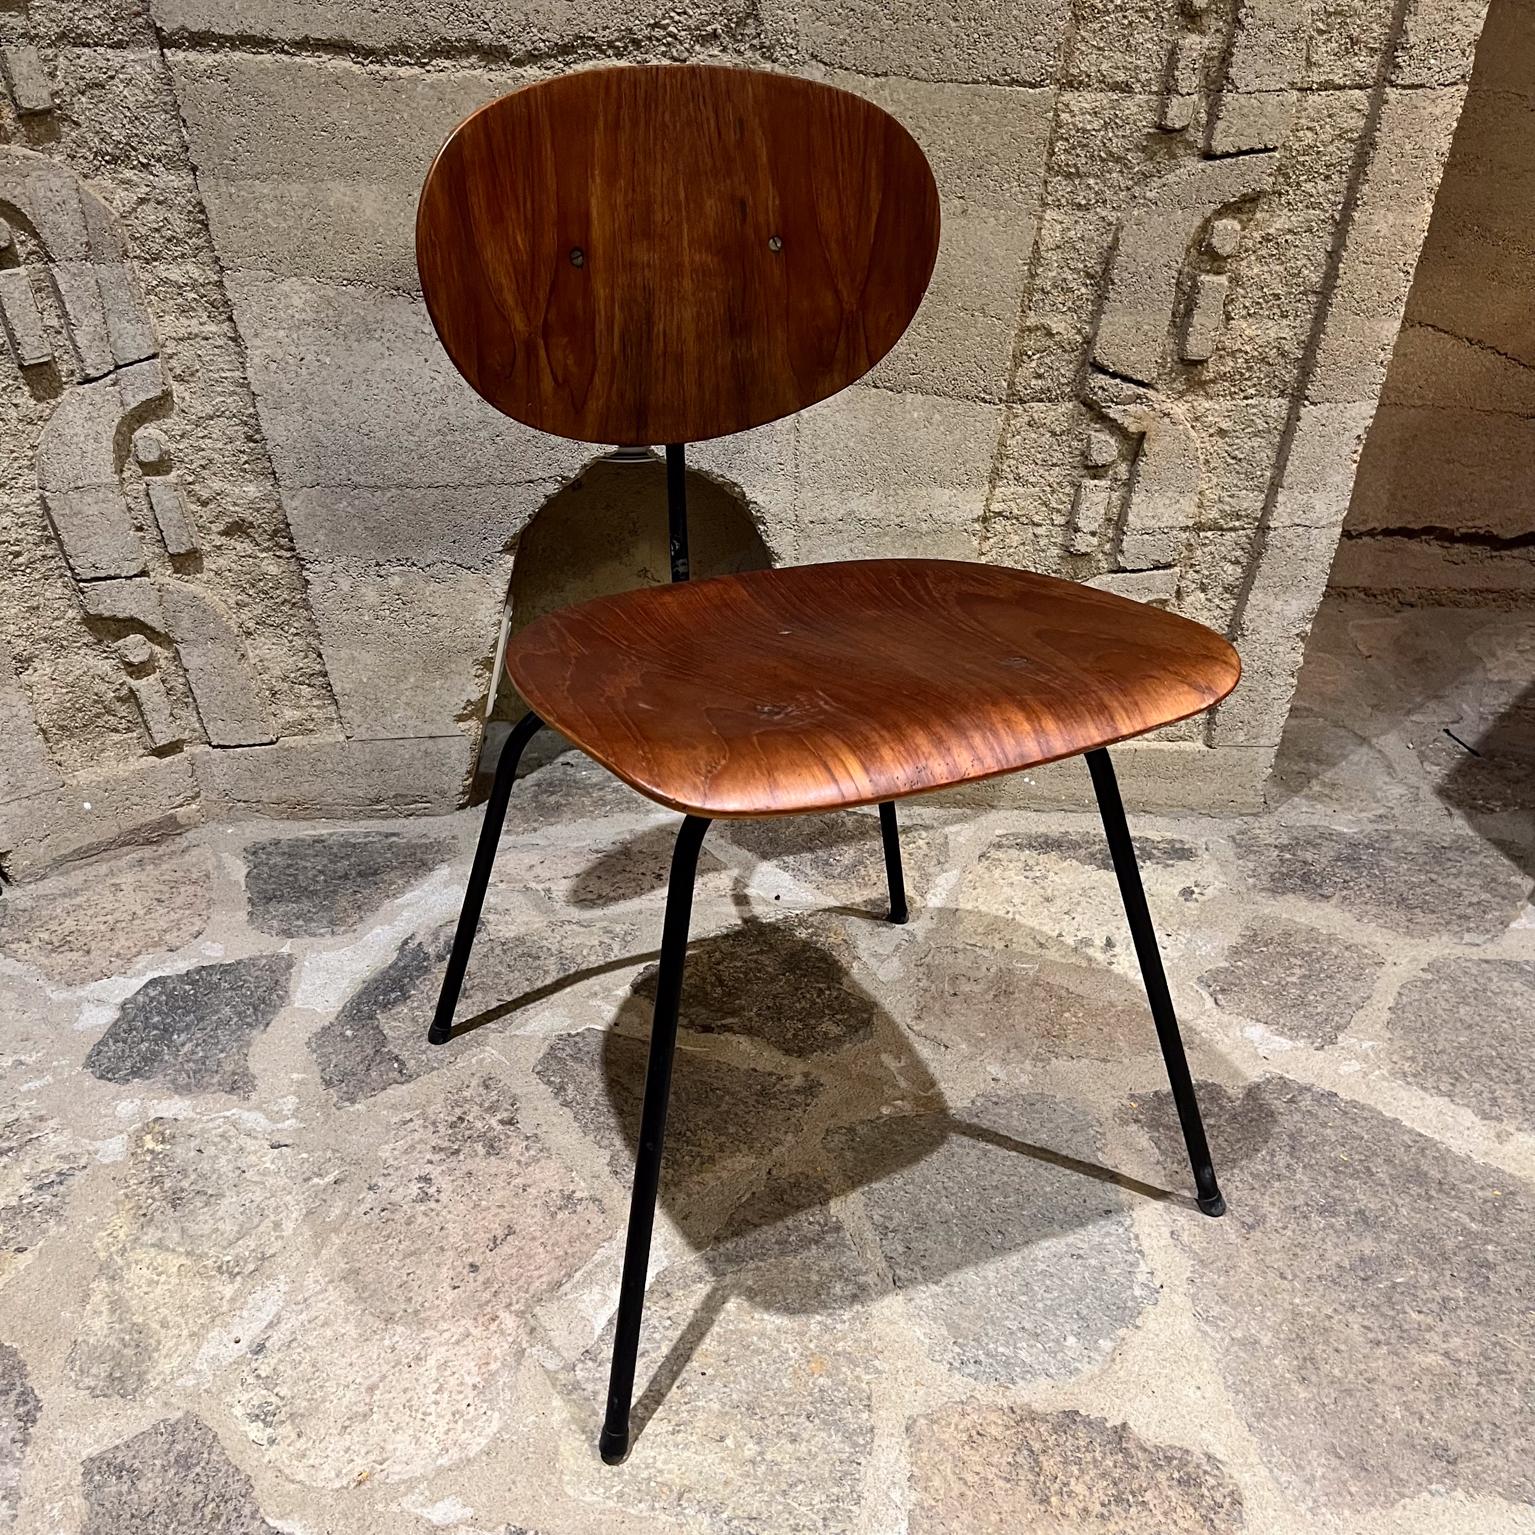 Late 1950s Molded Wood Chair after Eames Herman Miller Knoll
marvelous midcentury chair
Sculptural black Iron base
Features Molded Teak seat and back rest.
No label, chair appears as a prototype.
27.25 H x 26.25 W x 22.75 D, Seat 17.25 H
Unrestored